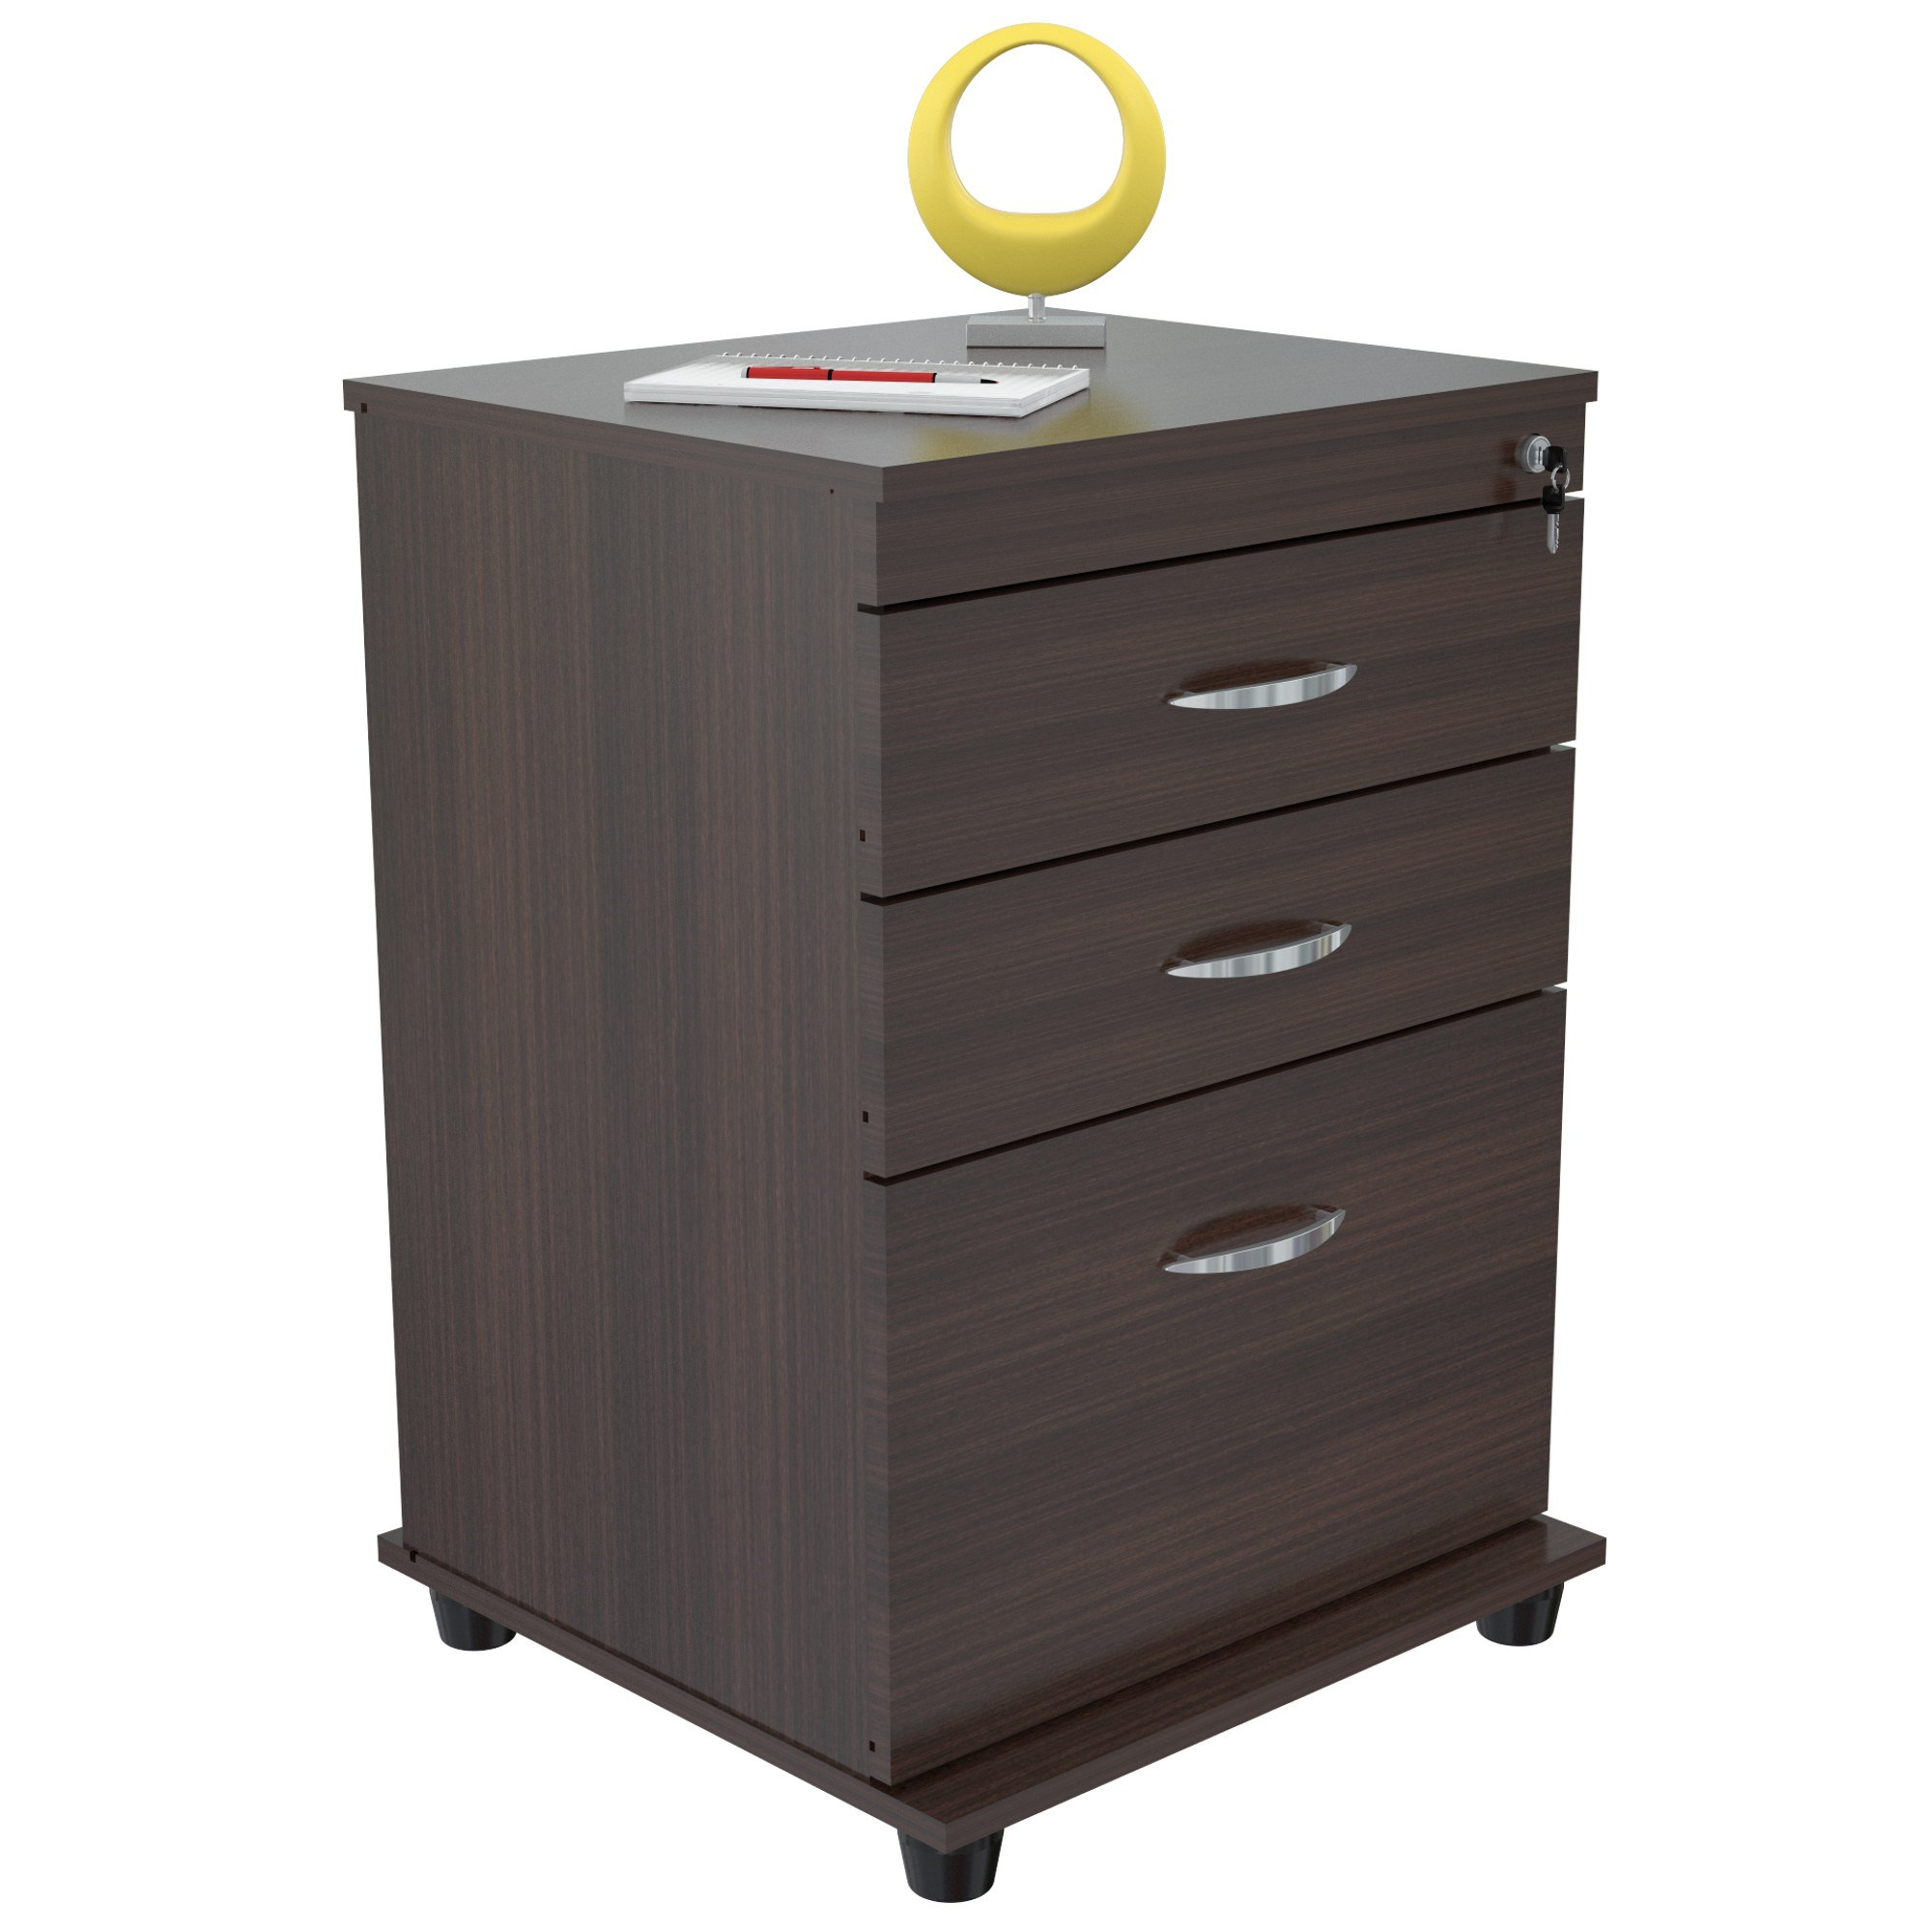 Inval 3 Drawer Vertical Wood Lockable Filing Cabinet Espresso throughout sizing 2000 X 2000